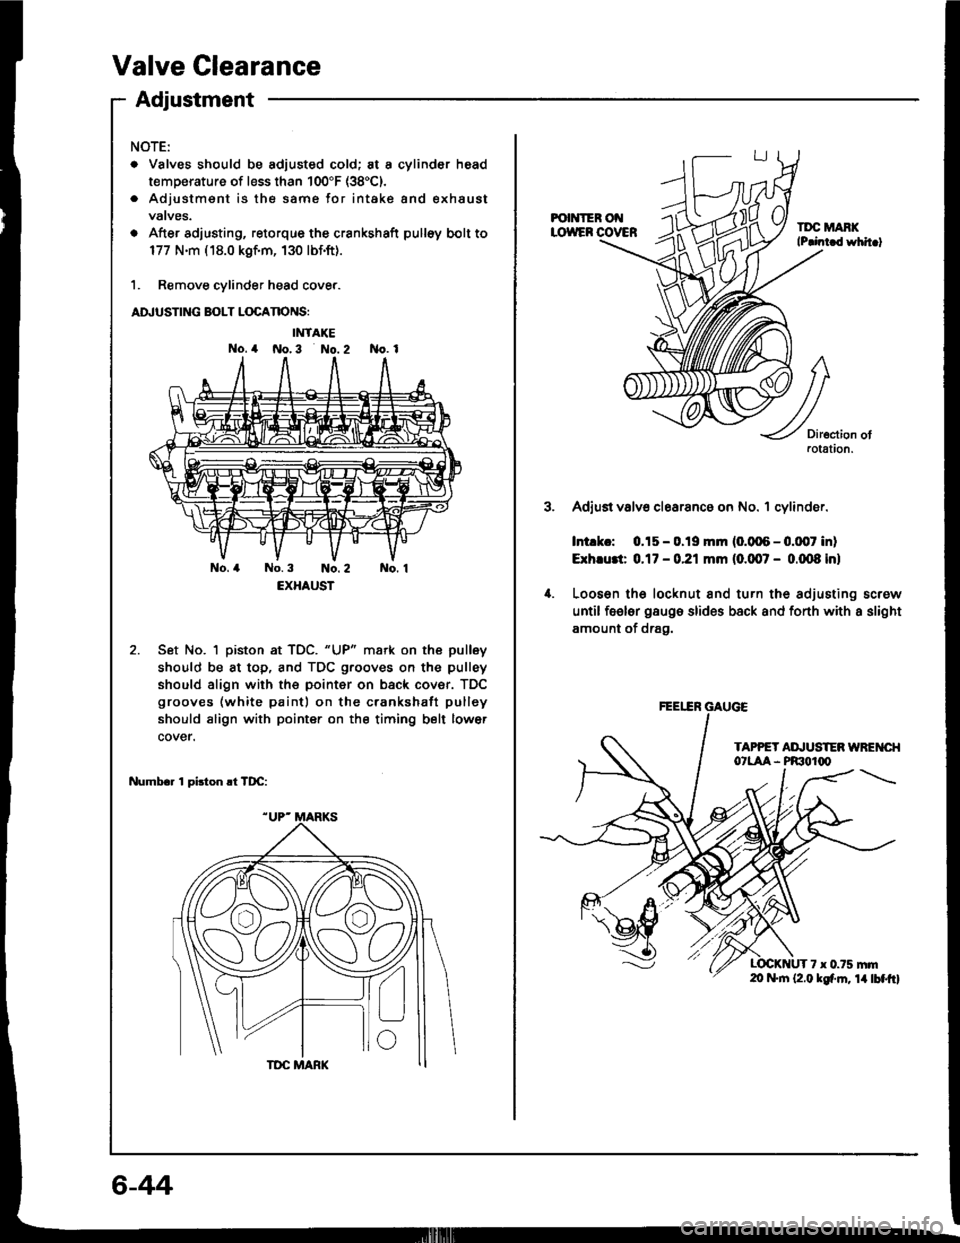 HONDA INTEGRA 1994 4.G Workshop Manual Valve Clearance
Adiustment
NOTE:
. Valves should be adjusted cold; at a cylinder head
temperature of less than 100"F (38C).
. Adjustmsnt is the same for intake and exhaust
vatves.
o After adjusting, 